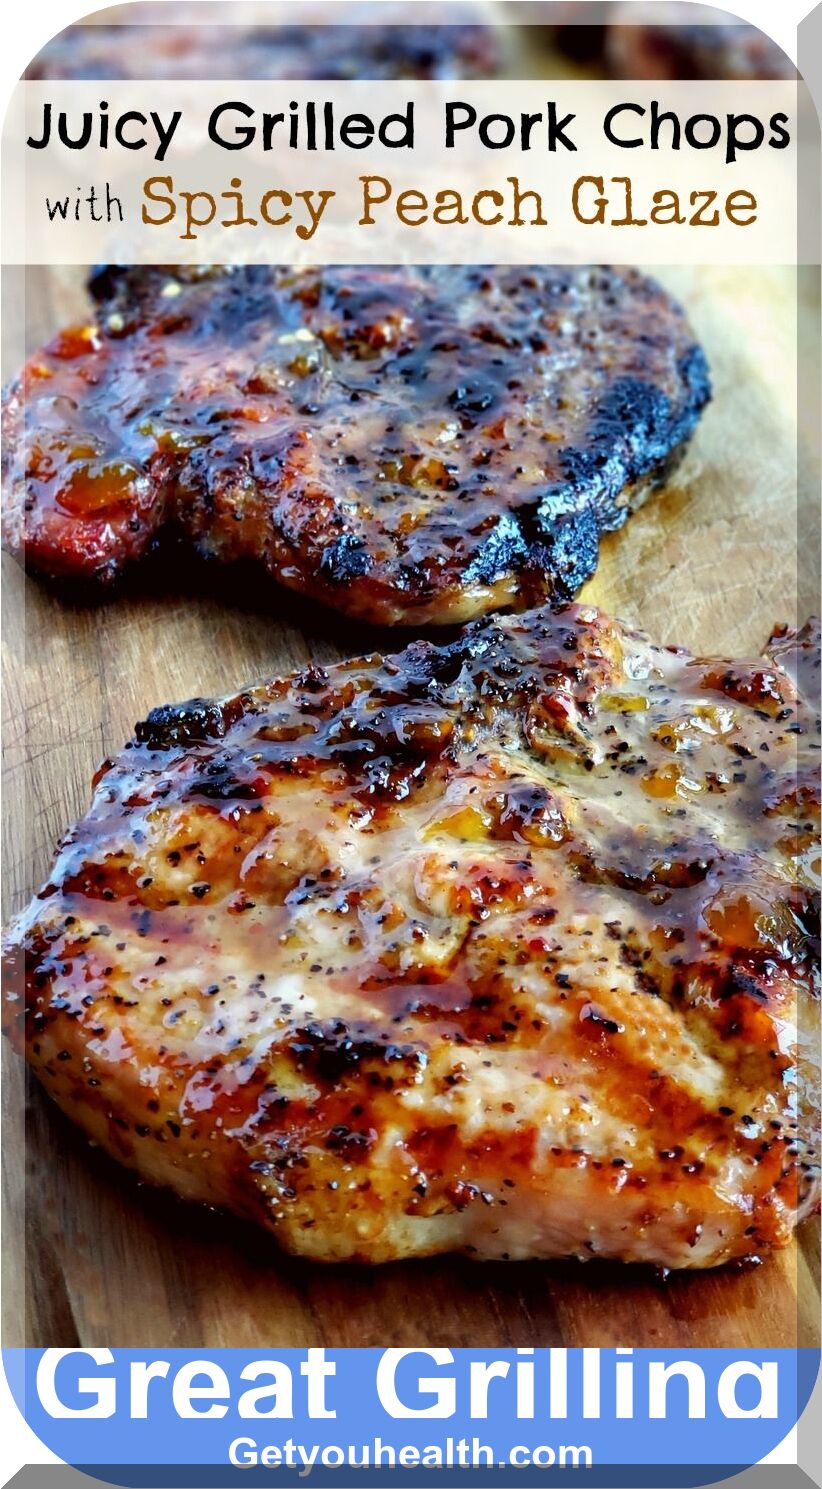 Juicy Grilled Pork Chops with Spicy Peach Glaze – Healthy Recipes